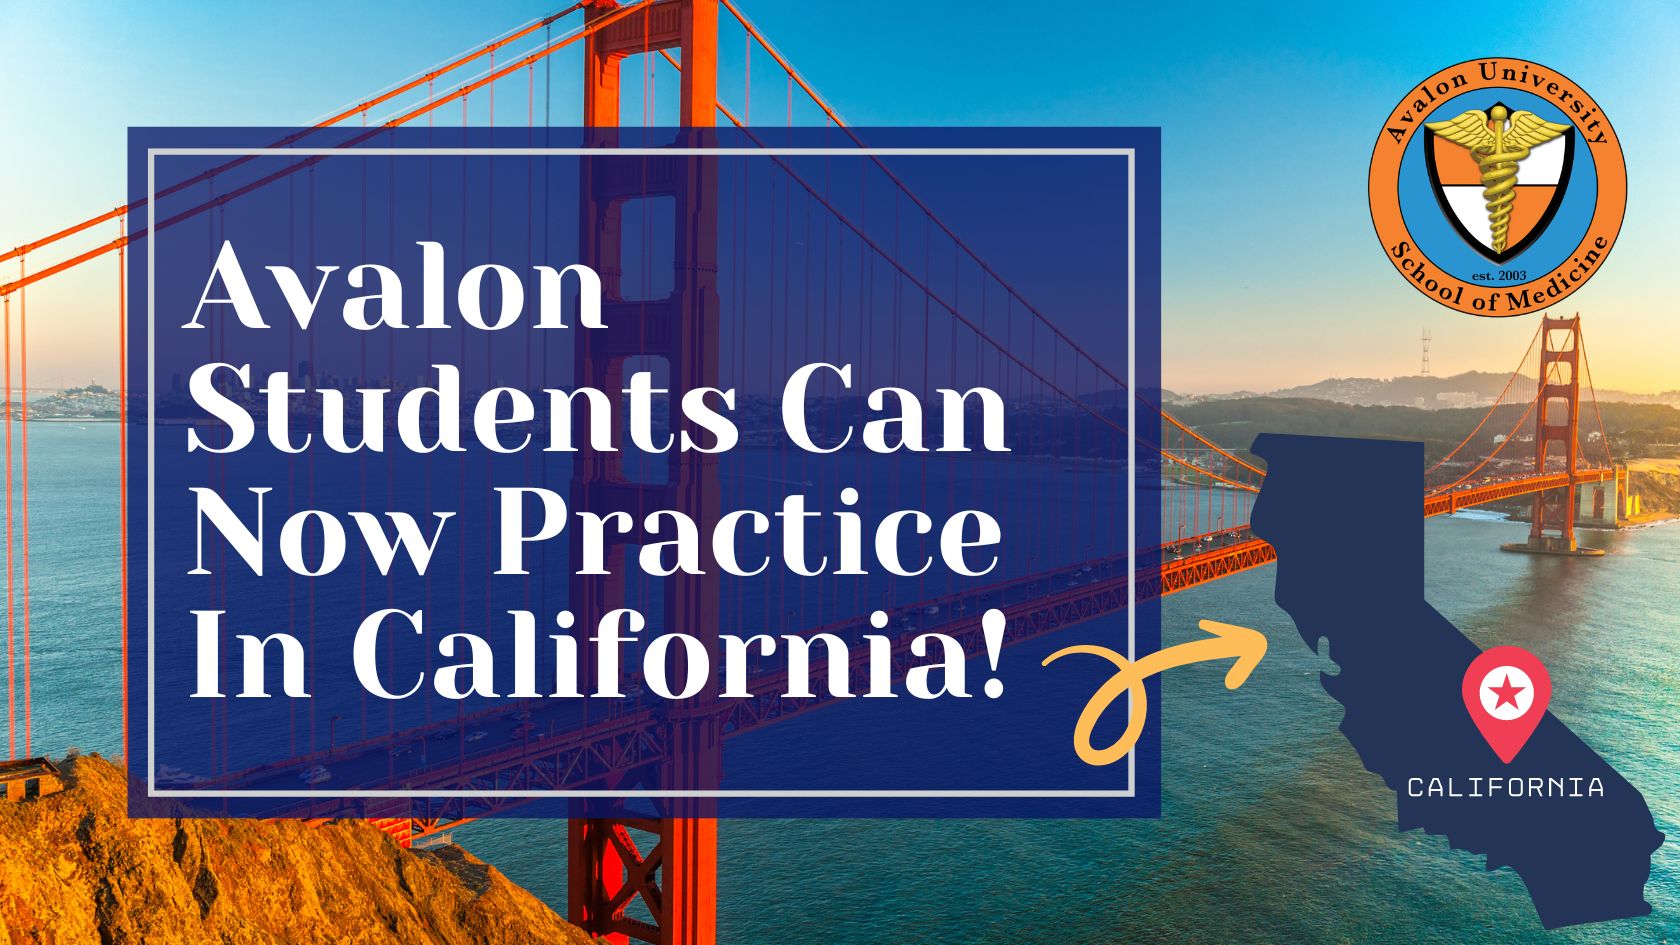 avalon students can now practice in California